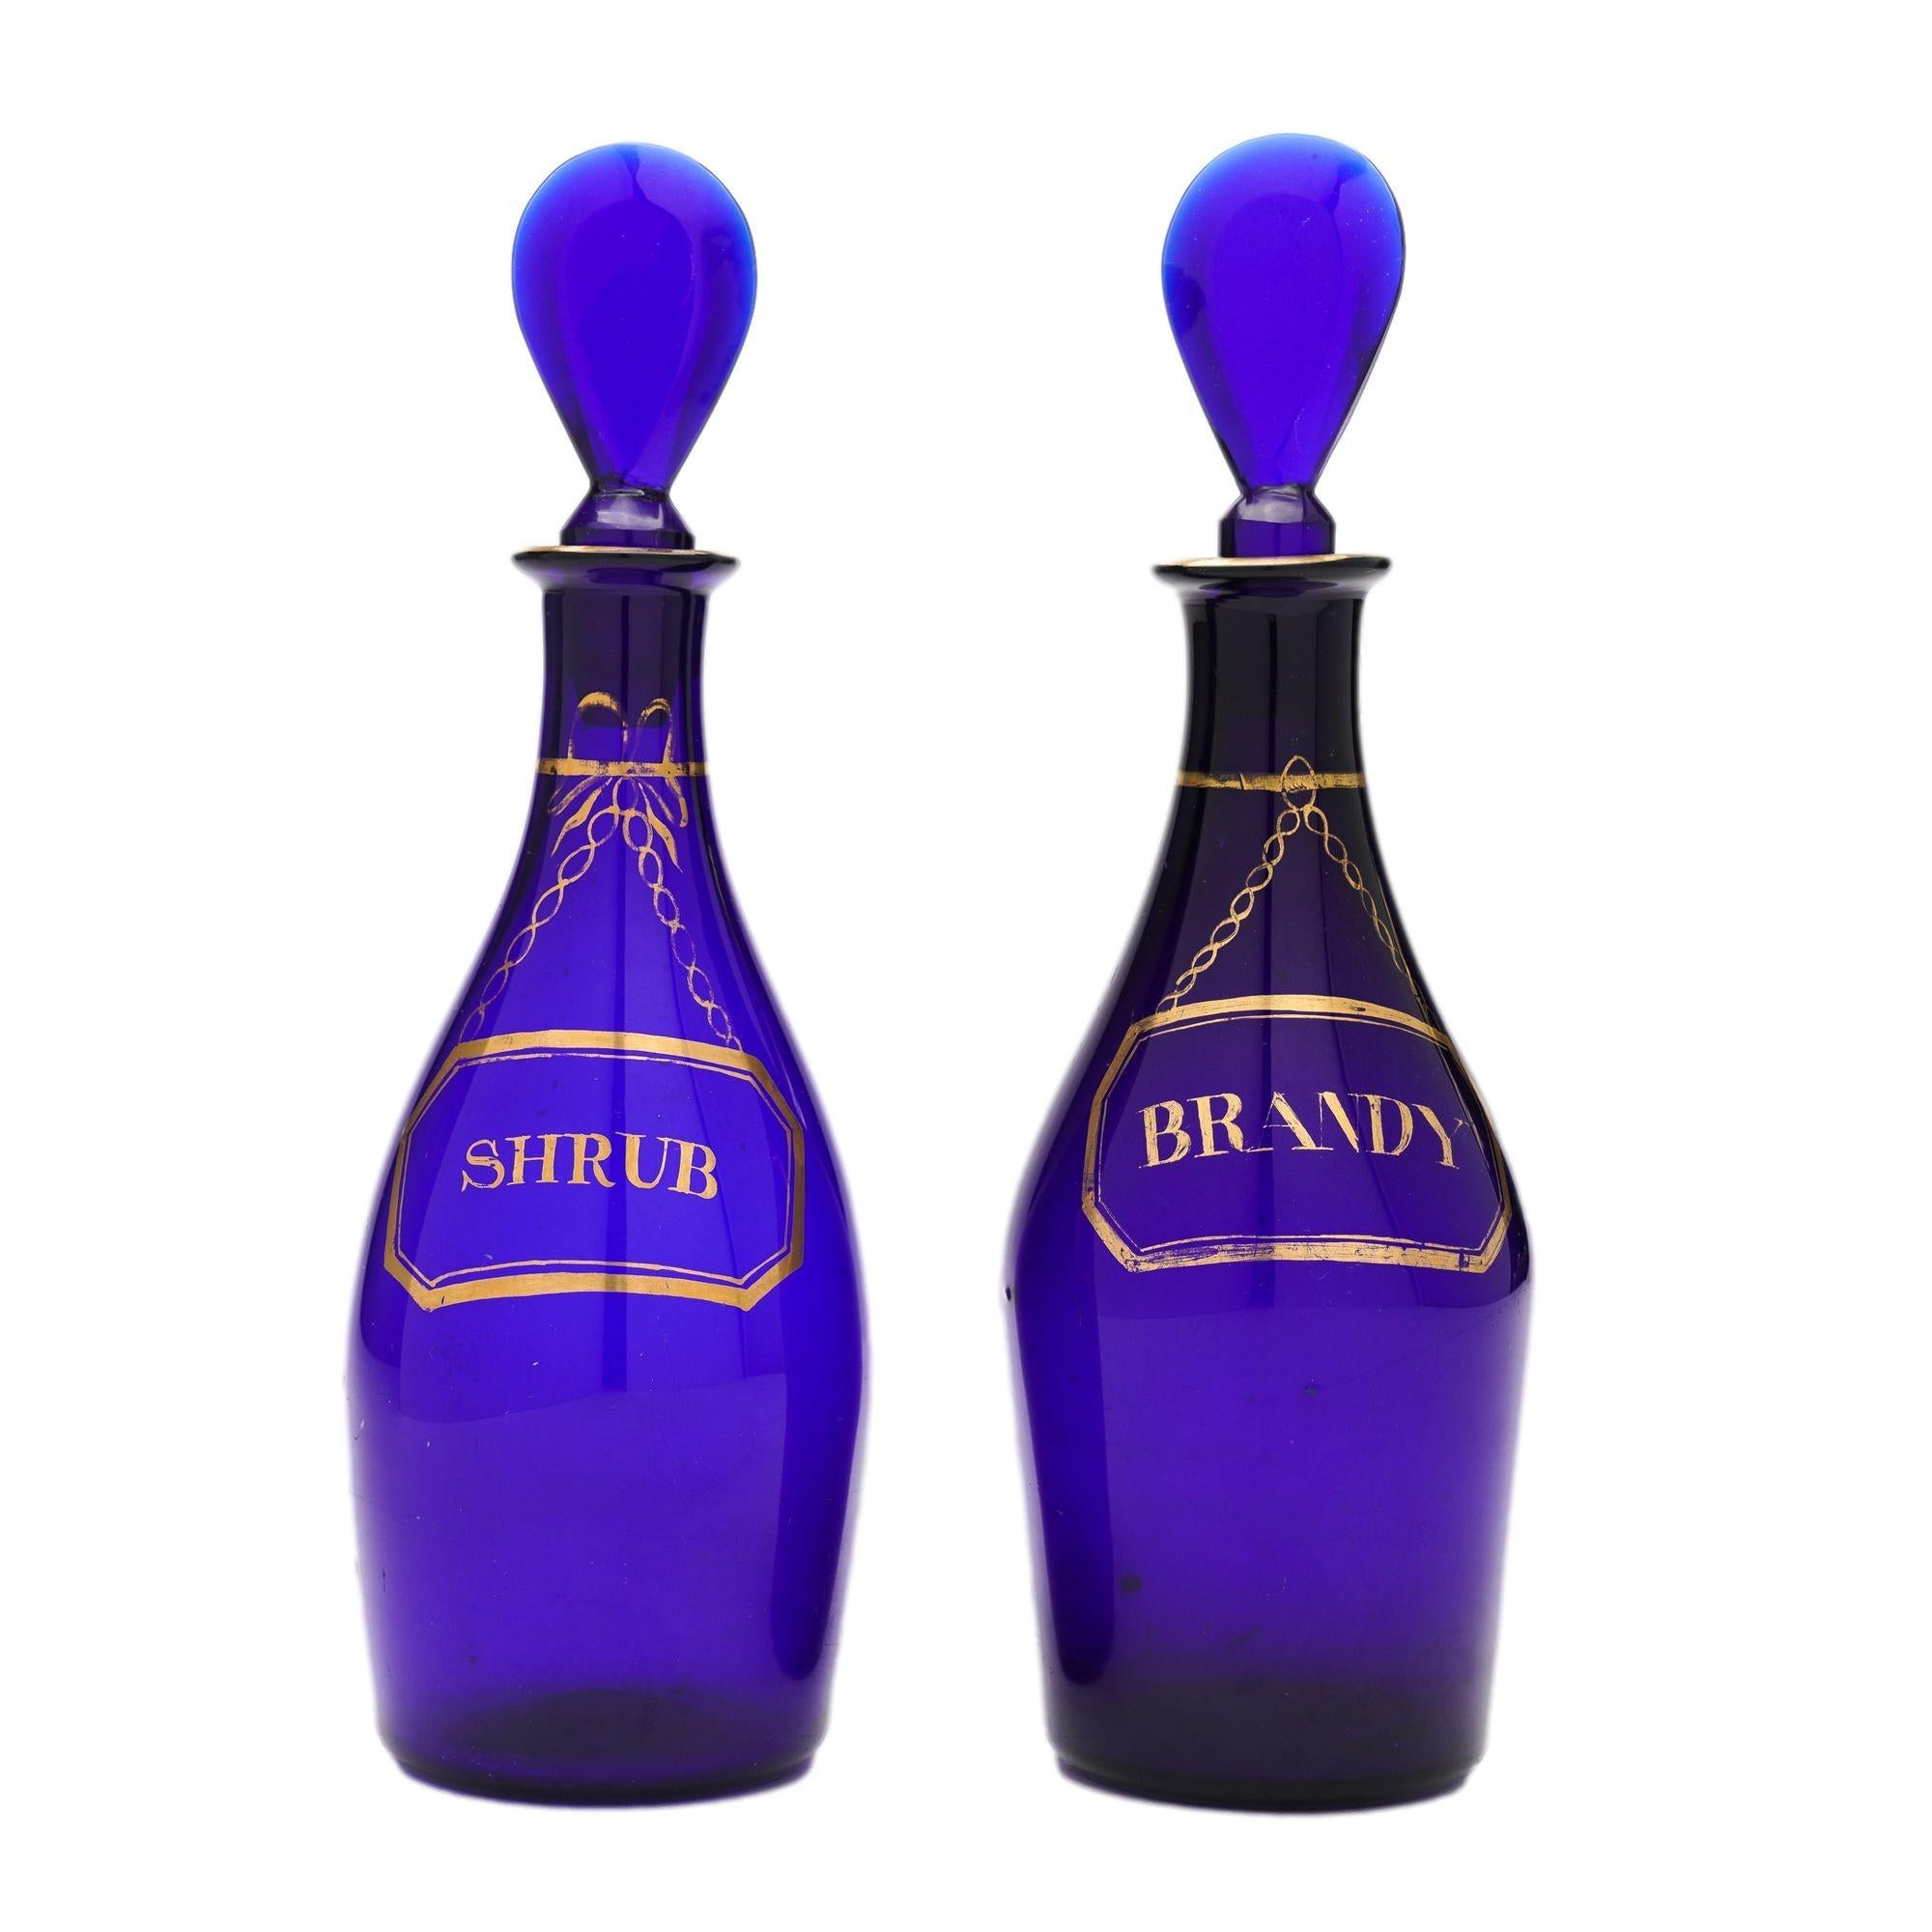 Pair of pyriform blown cobalt blue glass spirit bottles with mallet form stoppers and gilt decoration centering on identifying labels for Brandy and Shrub. Attributed to the studio of Isaac Jacobs.
Bristol, England, circa 1790-1810.